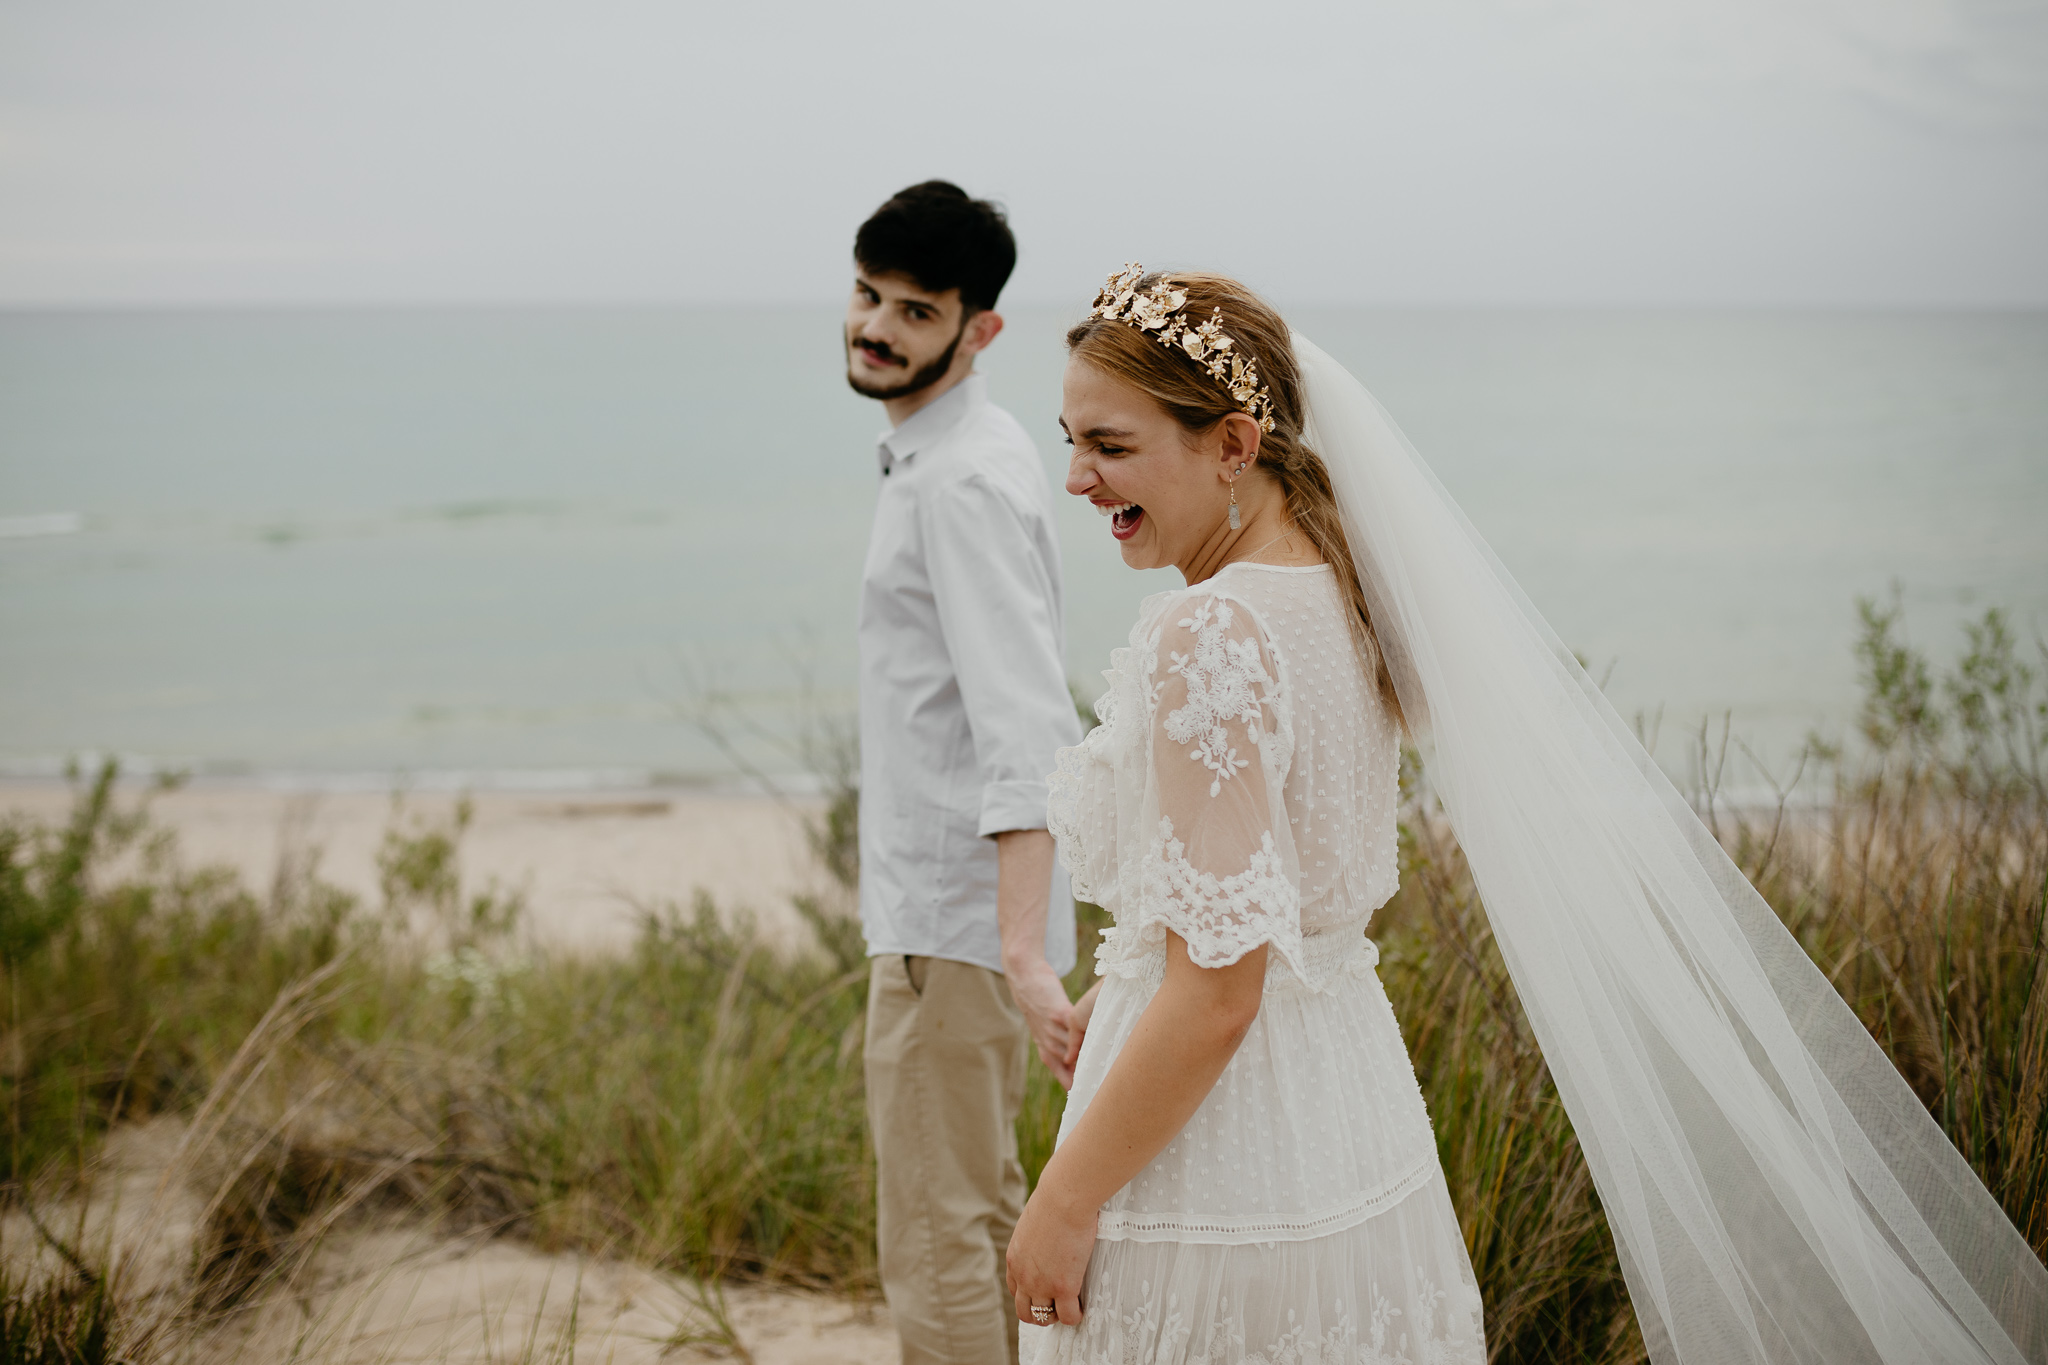 Ope! 7 Best Places to Elope in the Midwest - Sleeping Bear Dunes, Michigan Elopement